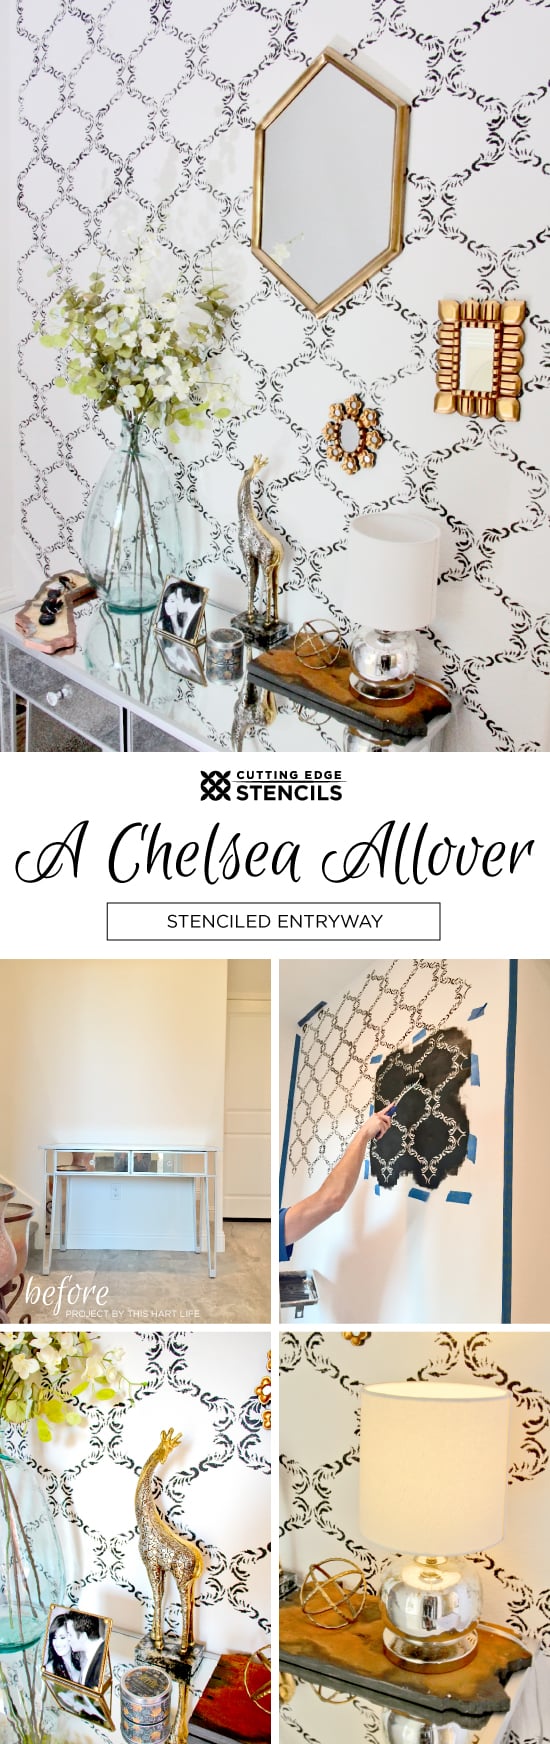 Cutting Edge Stencils shares DIY stenciled entryway using the Chelsea Allover Stencil. http://www.cuttingedgestencils.com/chelsea-allover-wall-pattern.html